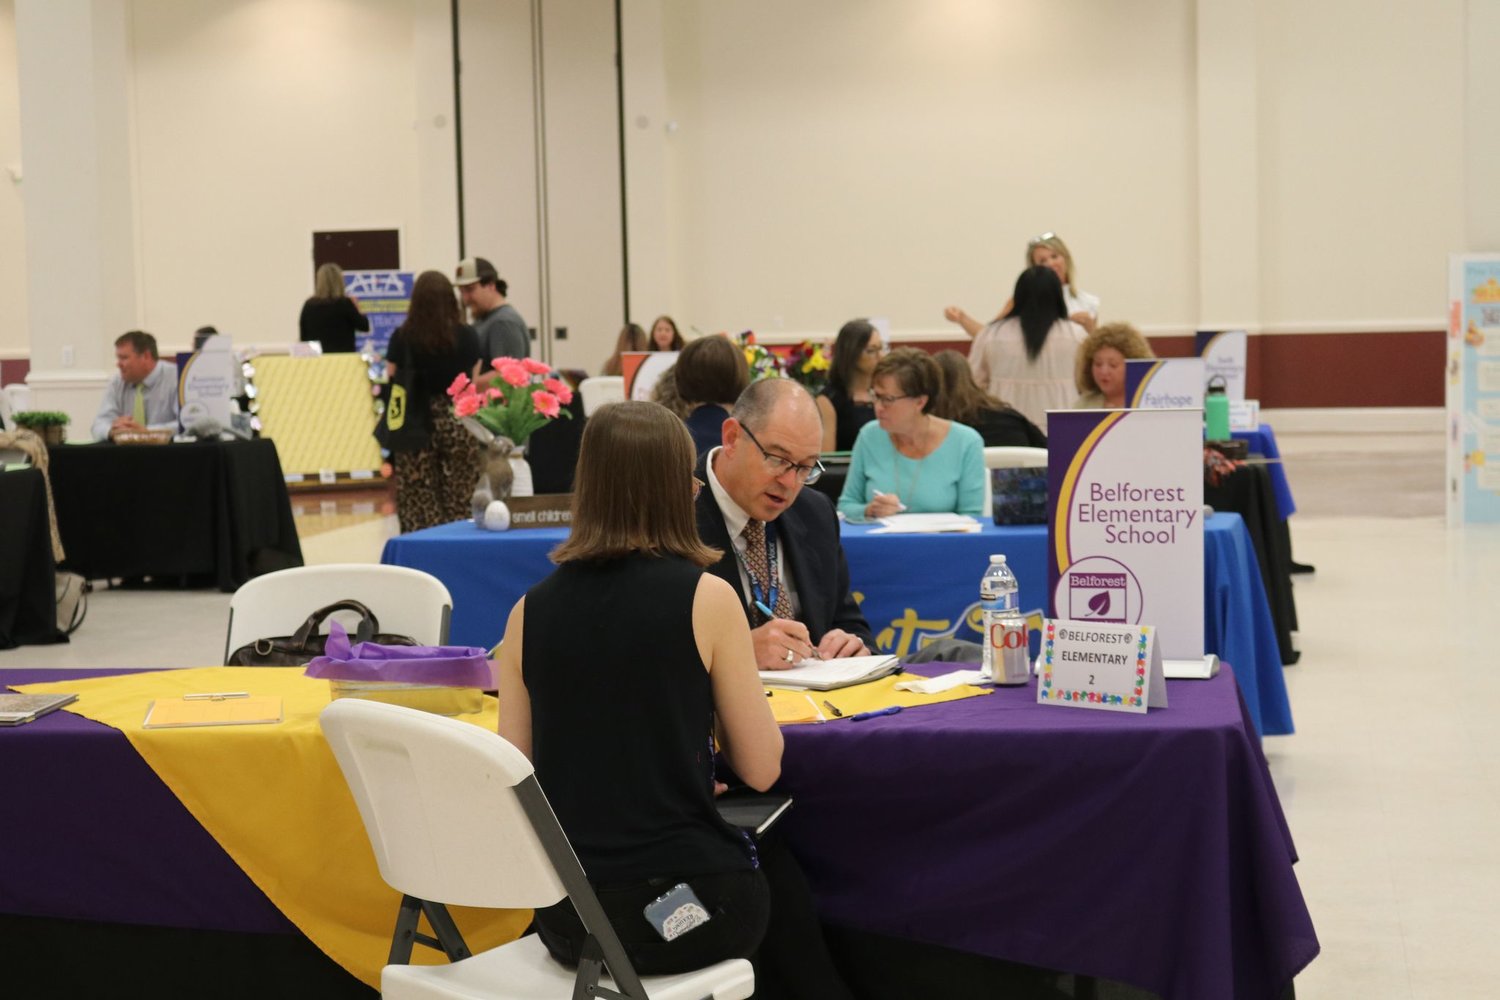 The Baldwin County Public School system held a large employee job fair in April and saw a record-breaking number of applicants. Throughout spring and summer, school districts across the county held job fairs and participated in recruiting efforts to combat the statewide teacher shortage.